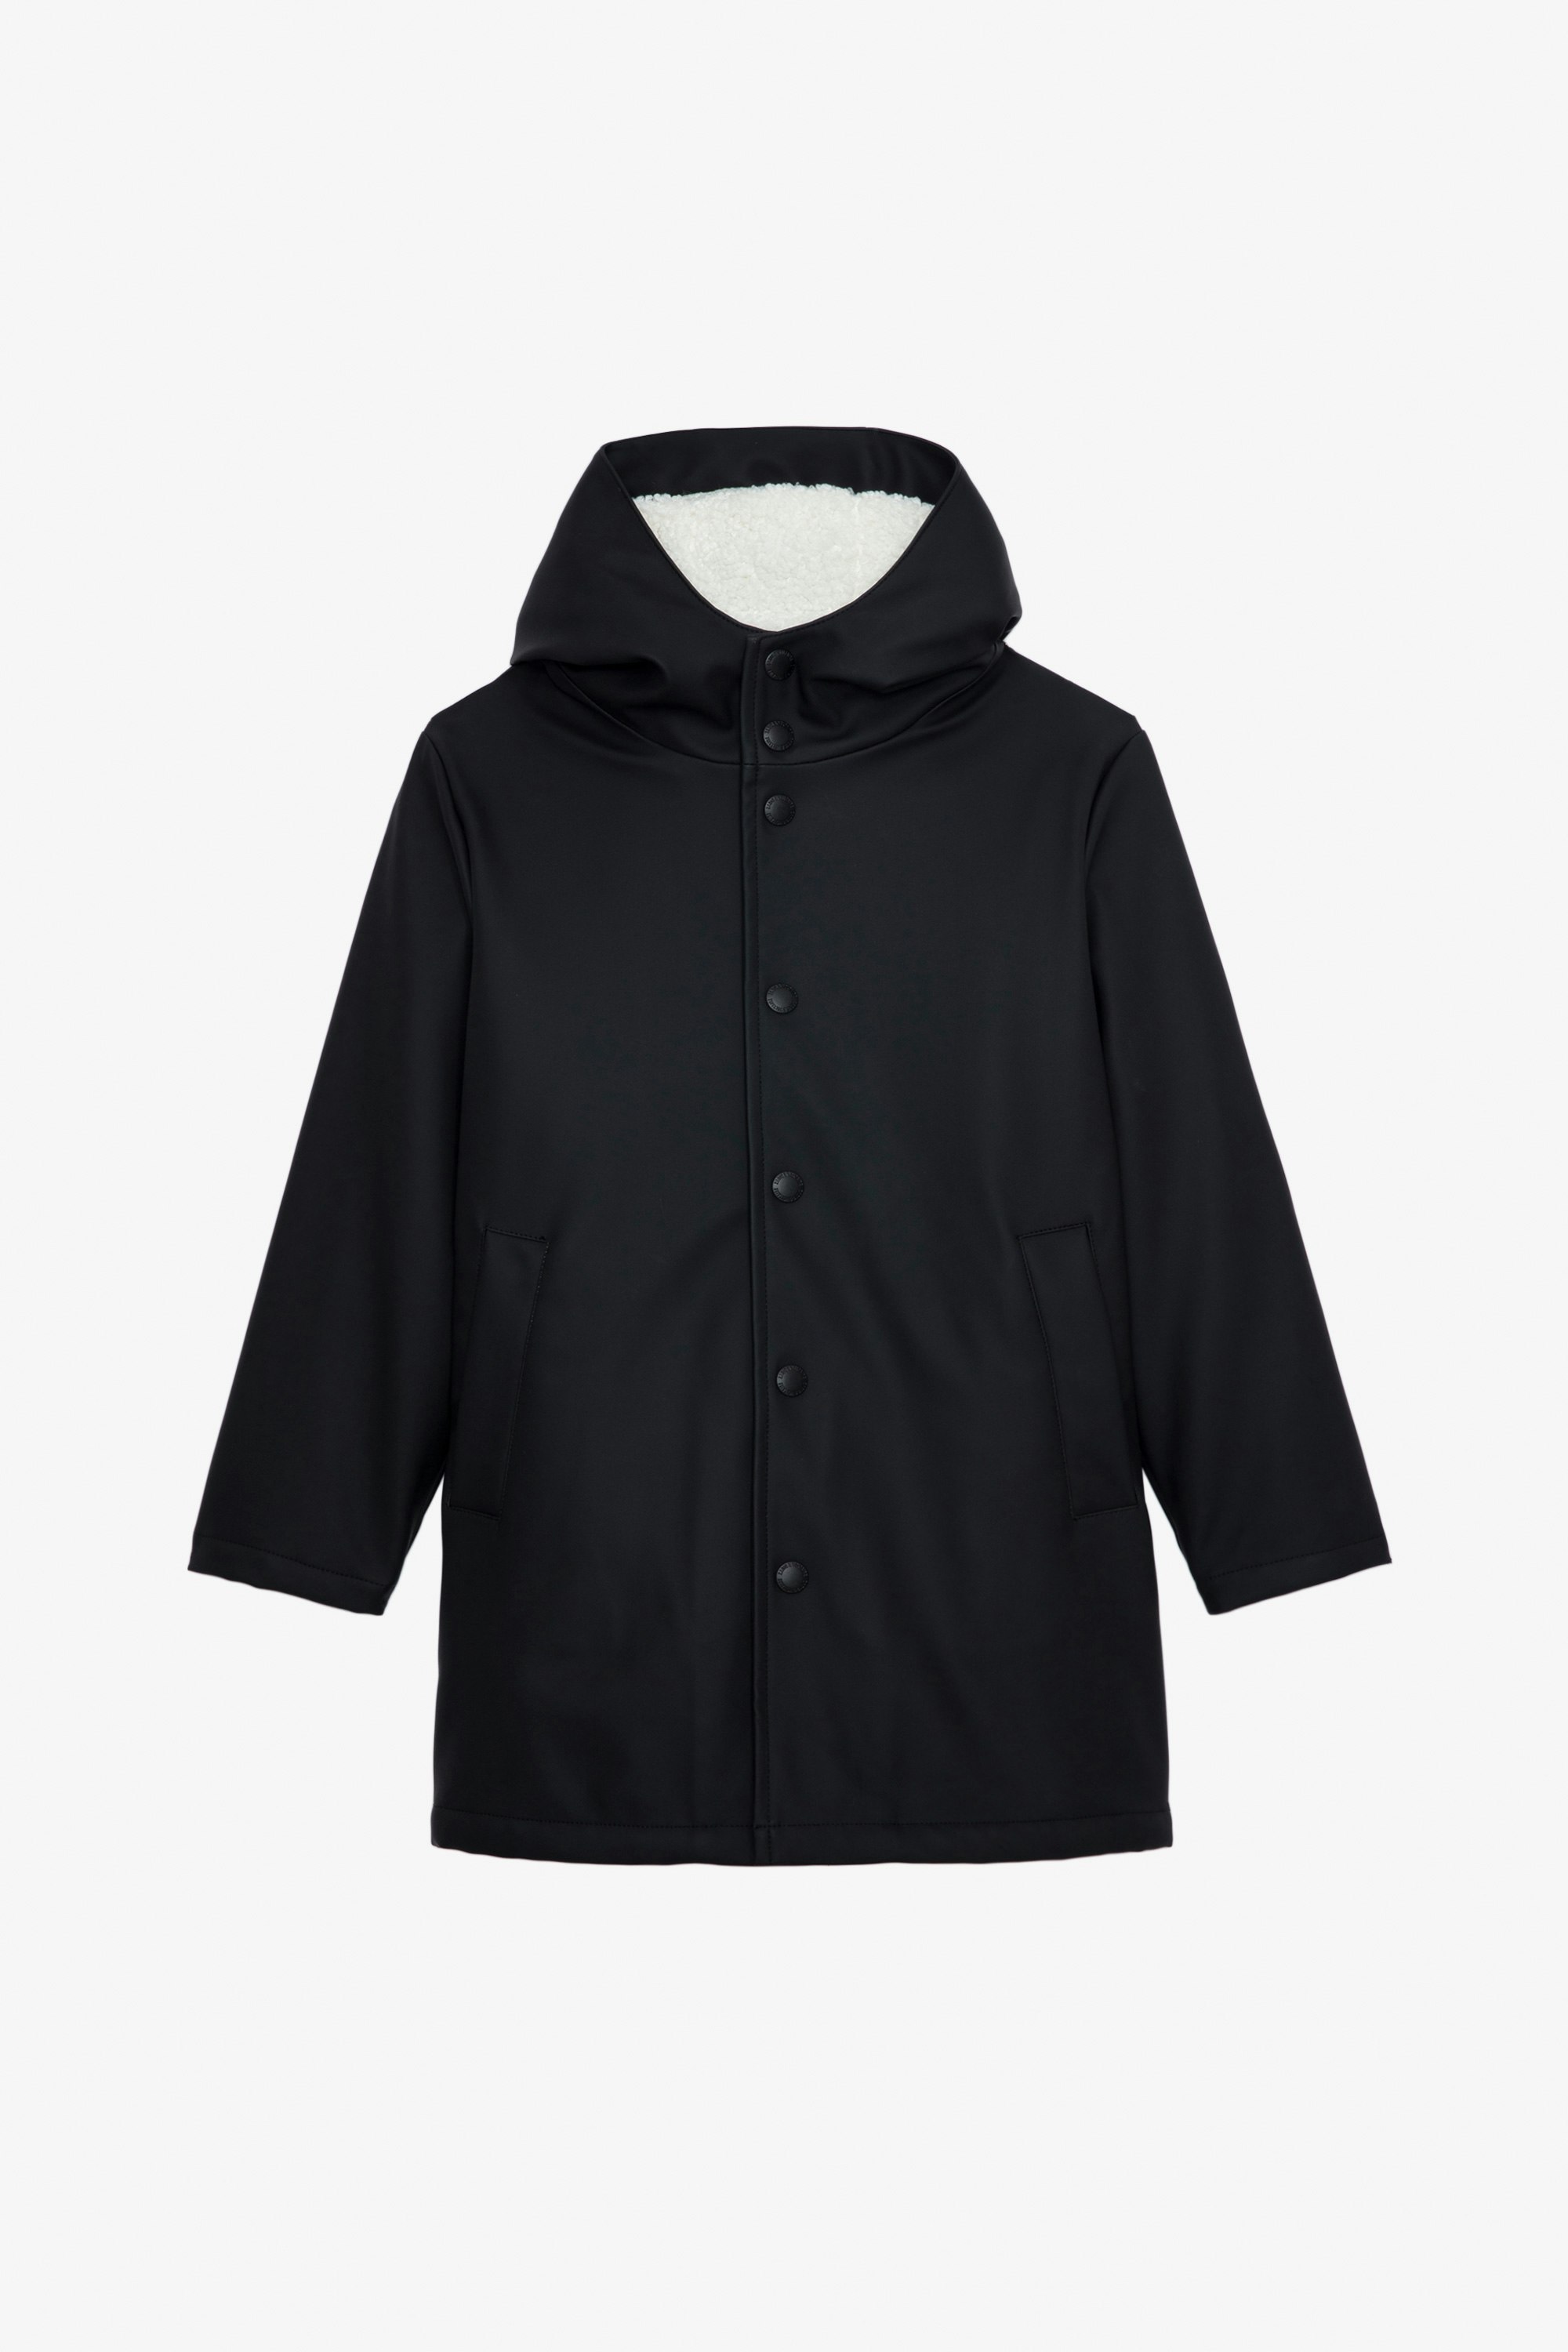 Dylan Boys’ Waxed Raincoat Boys’ black water-repellent hooded waxed raincoat with lining and arrow motifs on the back.